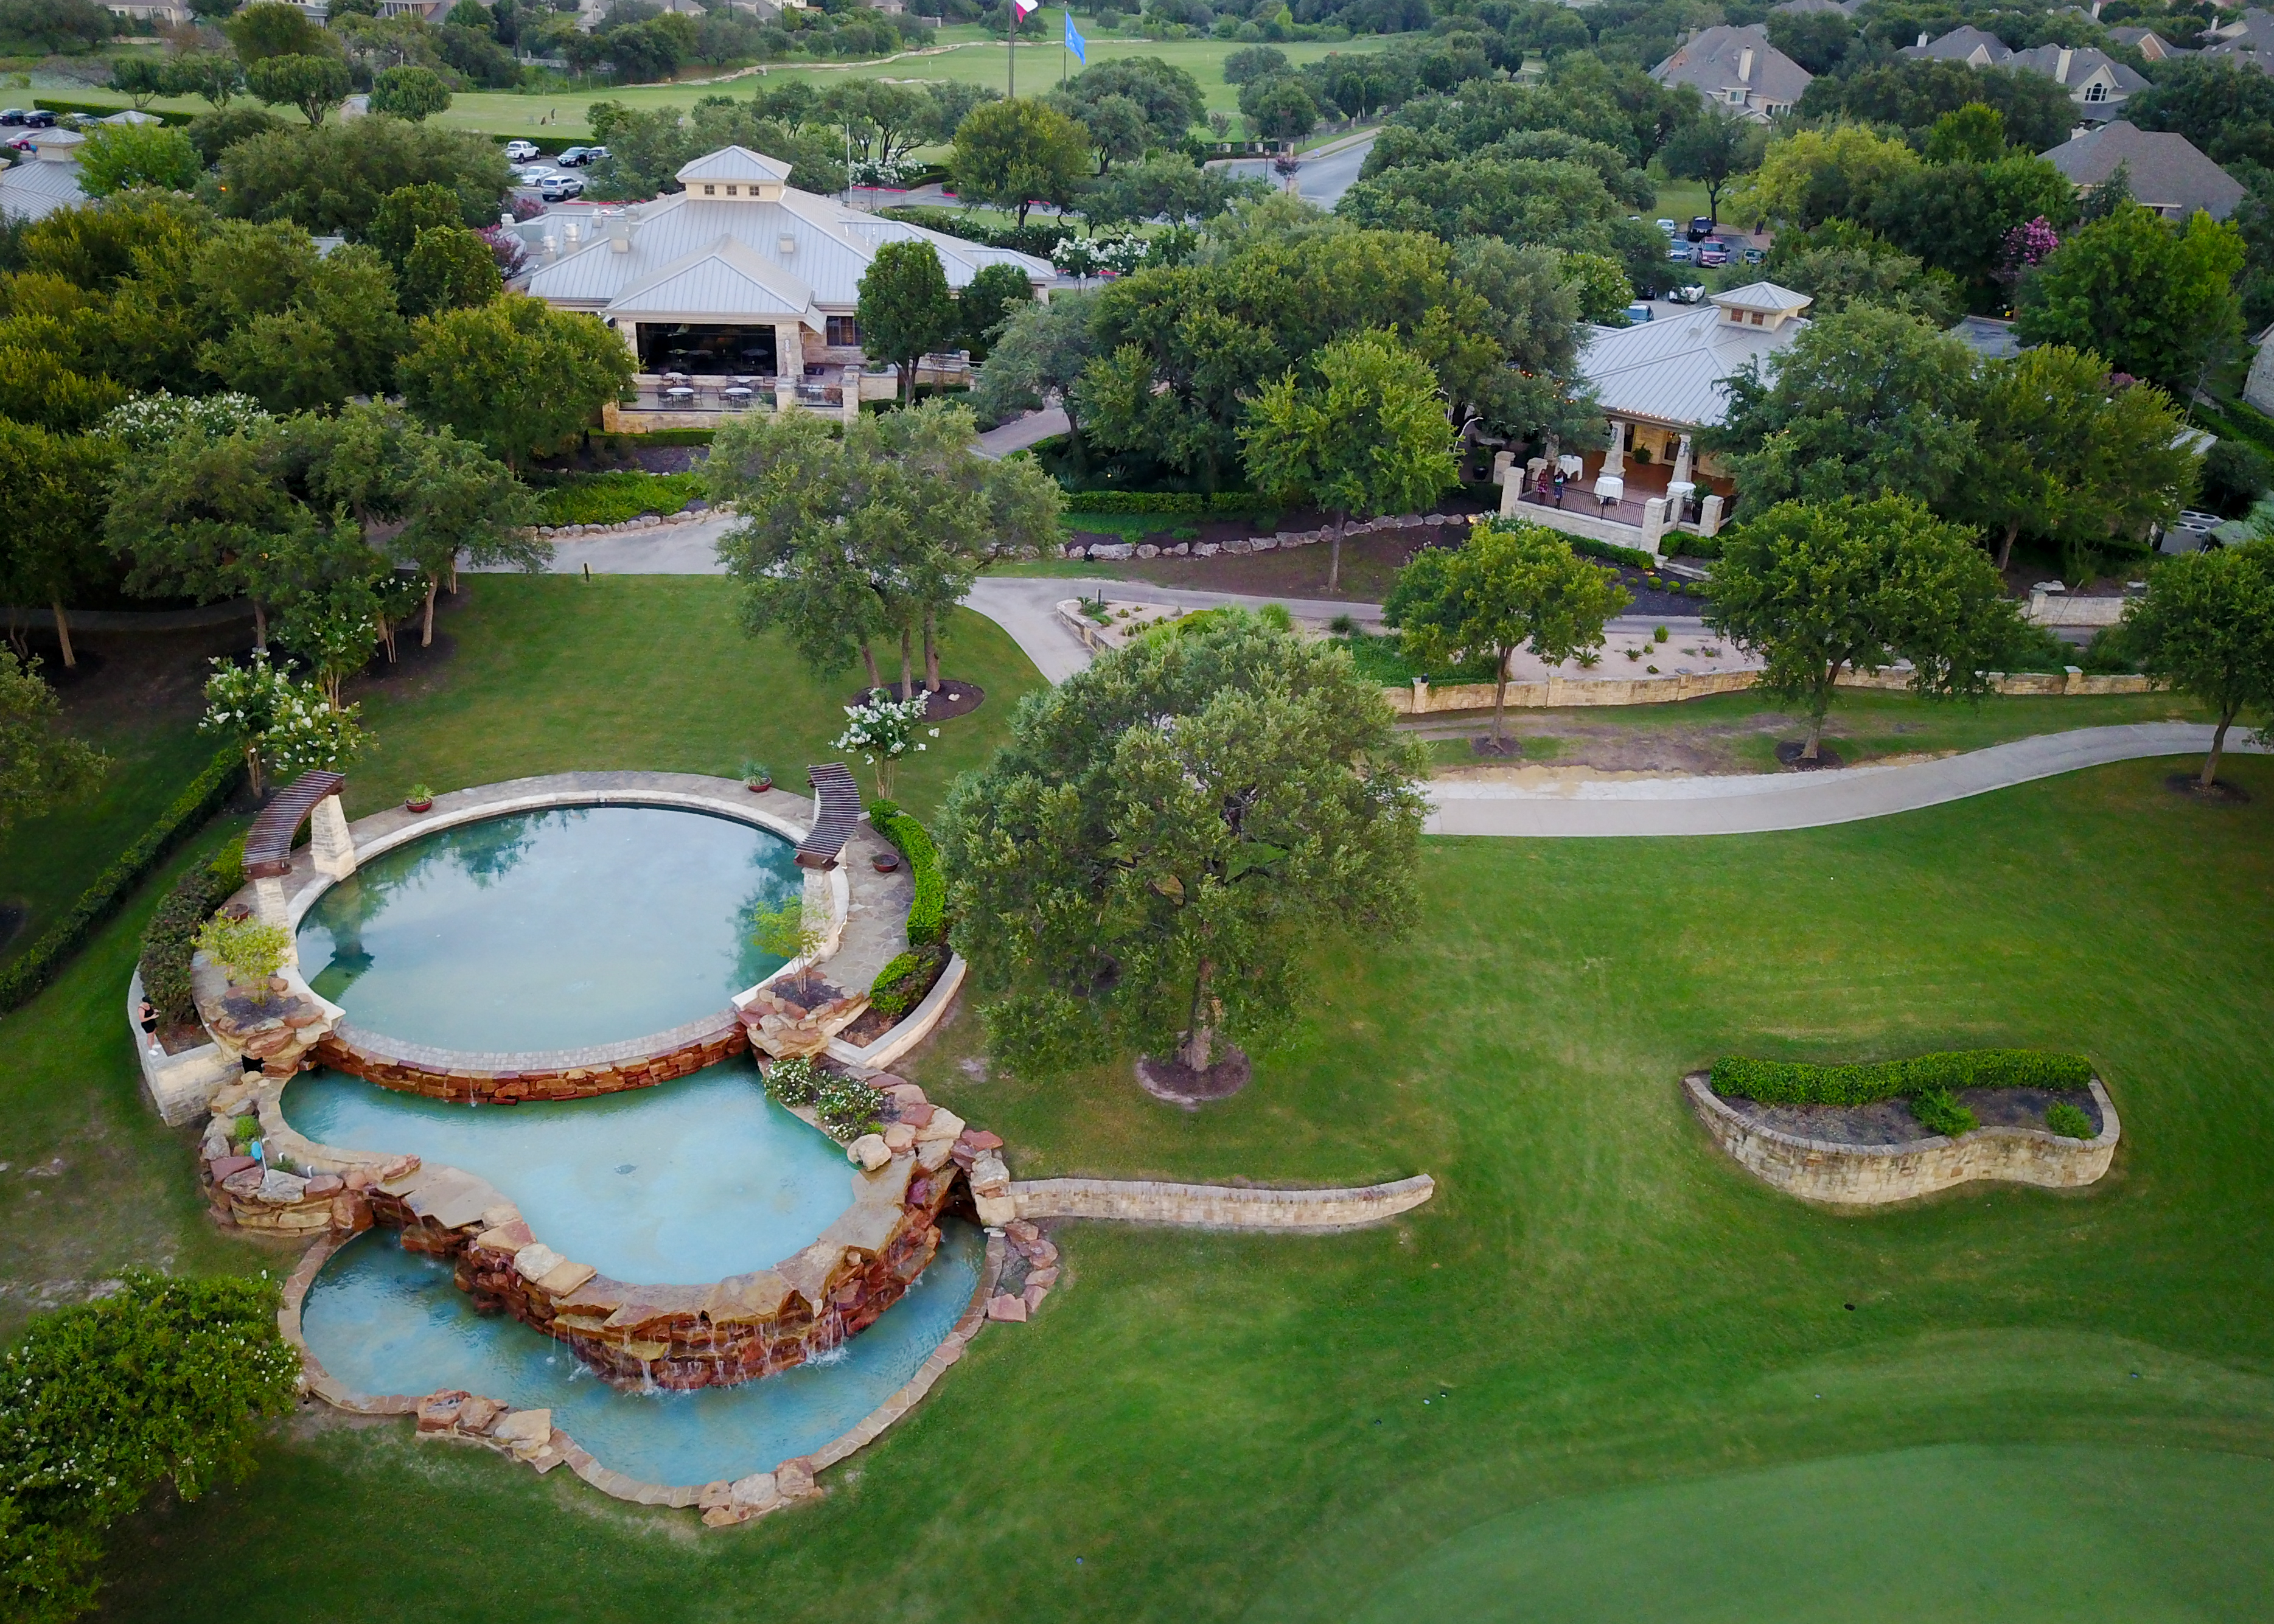 Golf Packages by VIP Golf Austin